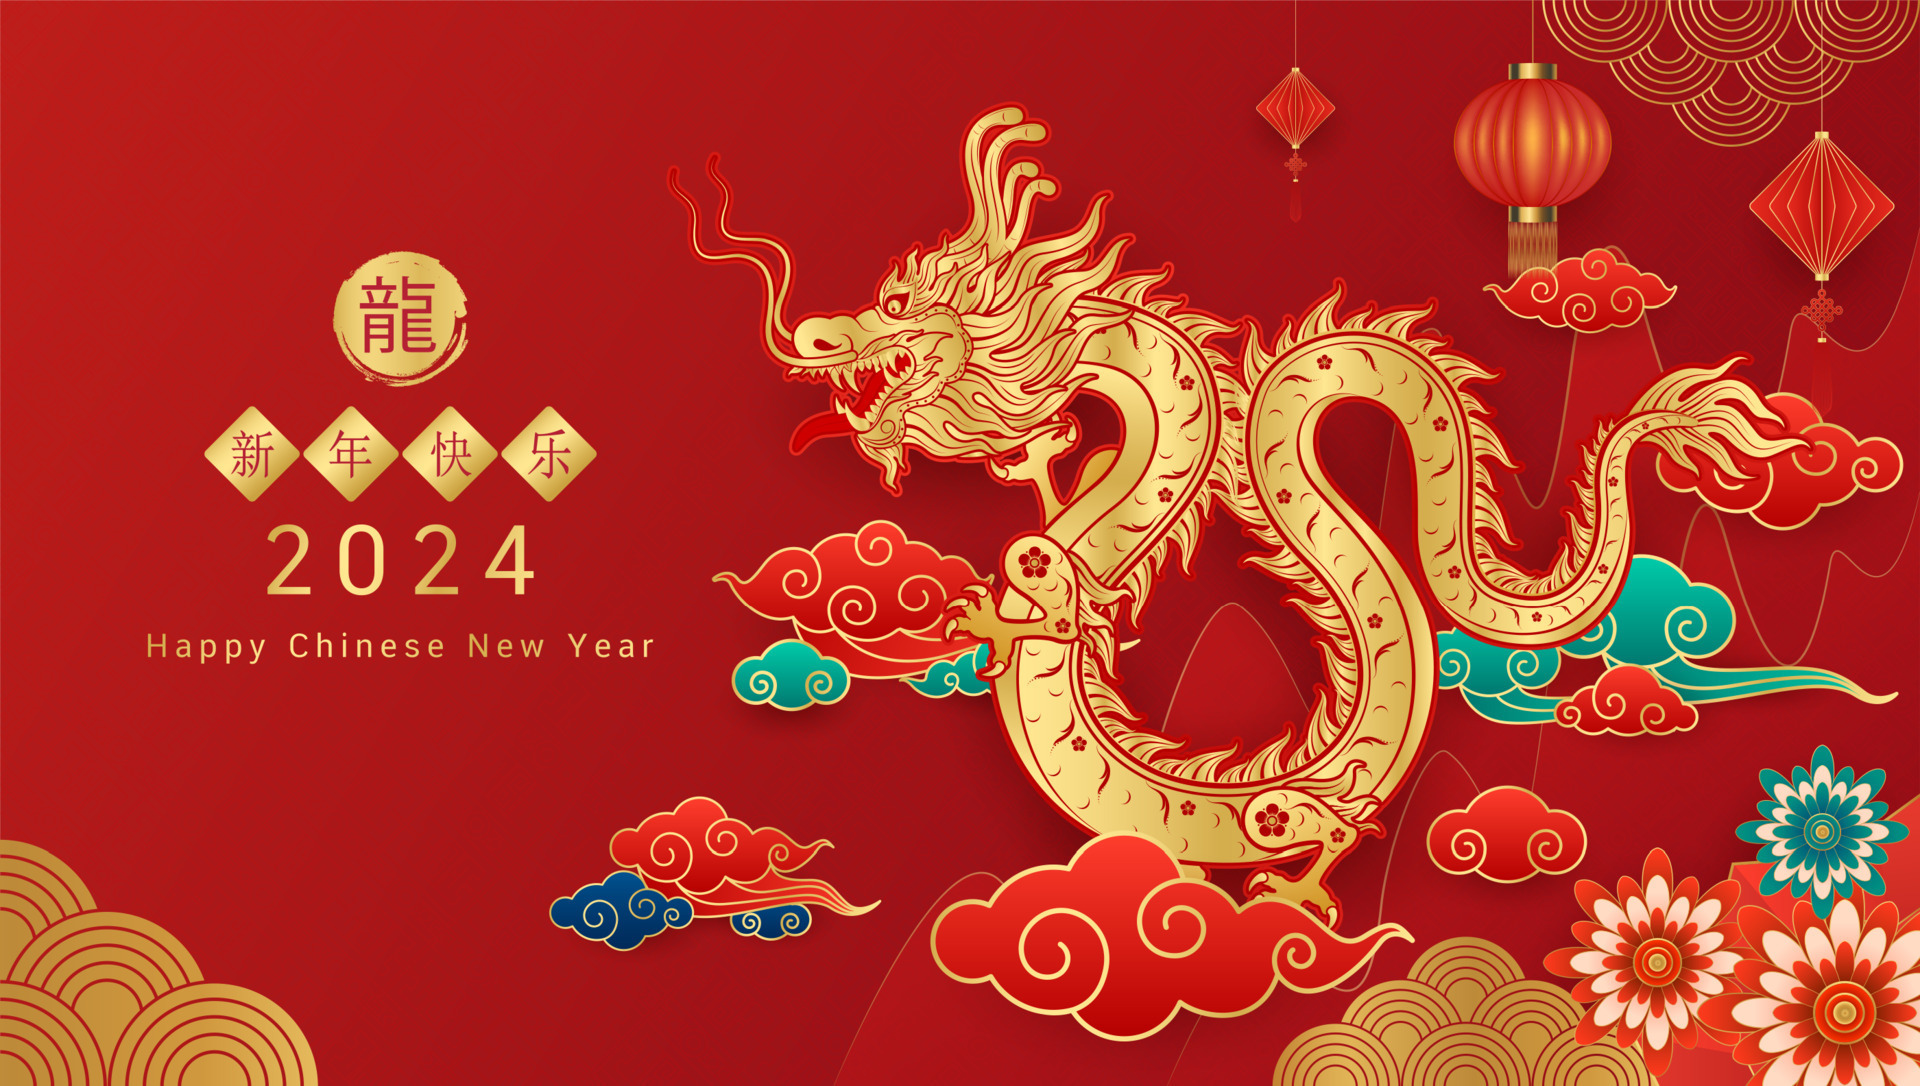 Chinese New Year In Taiwan 2024 Image to u